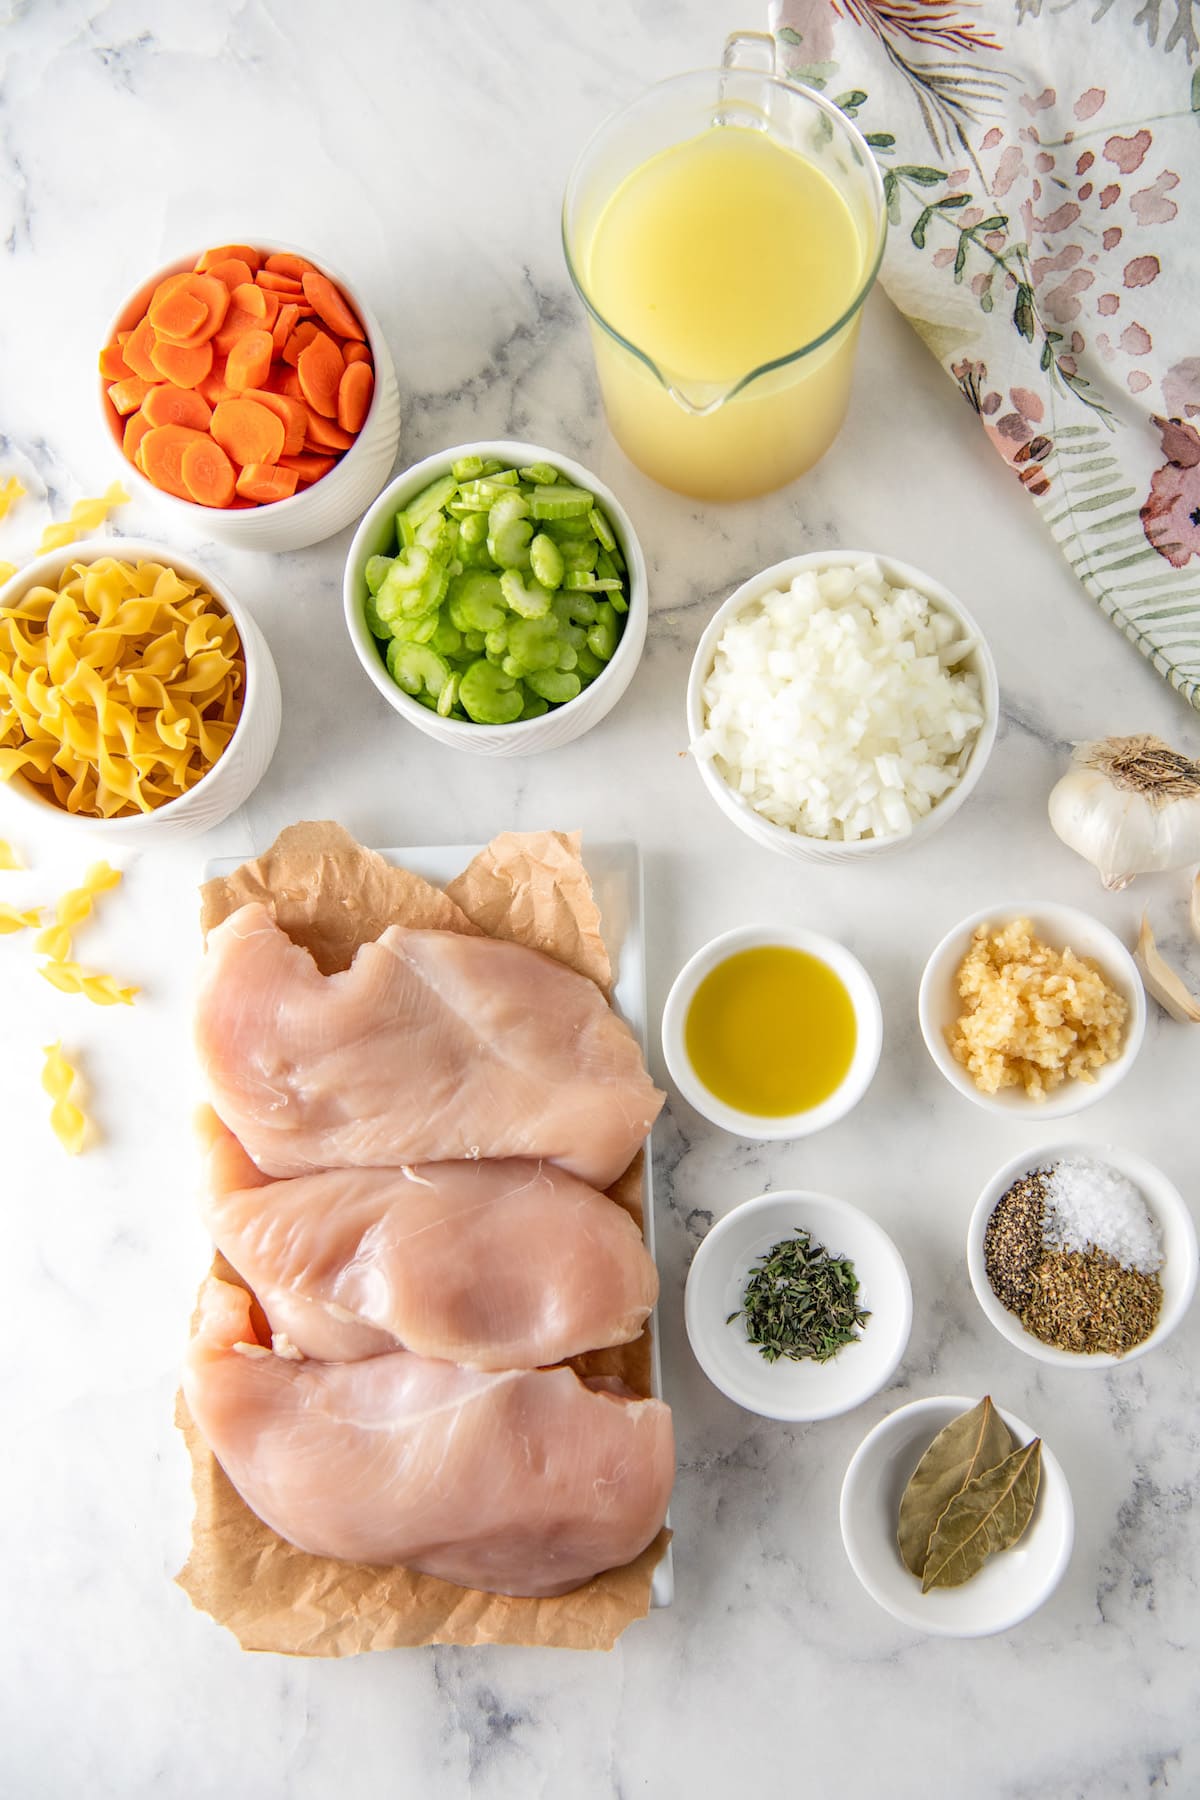 ingredients to make chicken noodle soup including chicken breasts, diced carrots, celery, and onions, and other seasonings